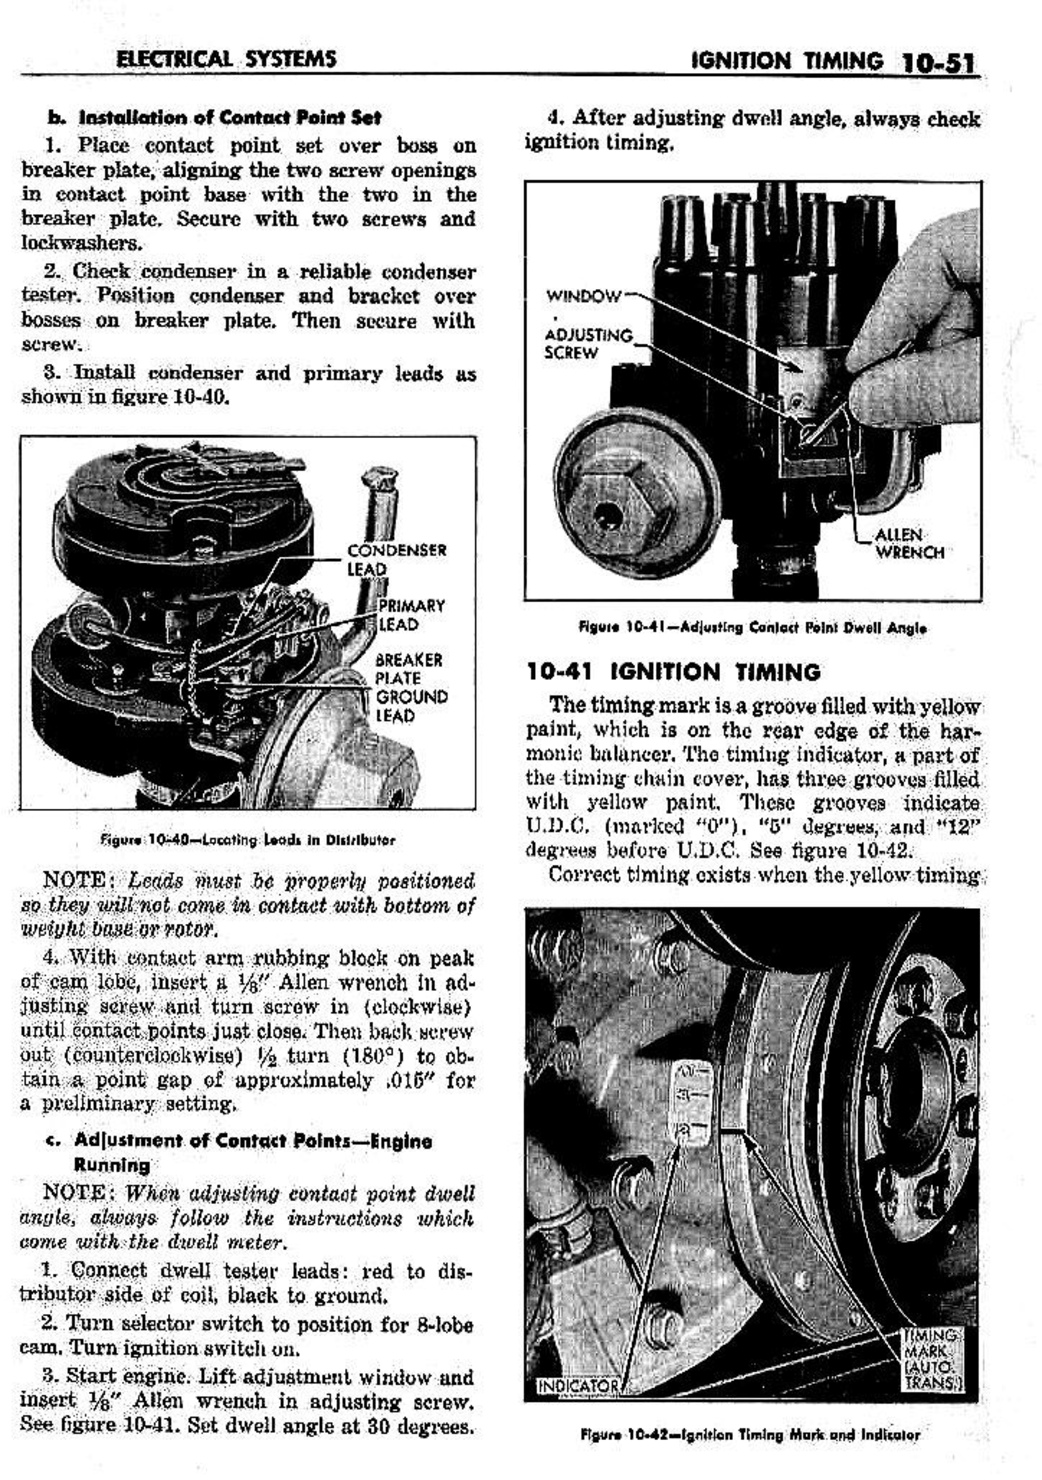 n_11 1959 Buick Shop Manual - Electrical Systems-051-051.jpg